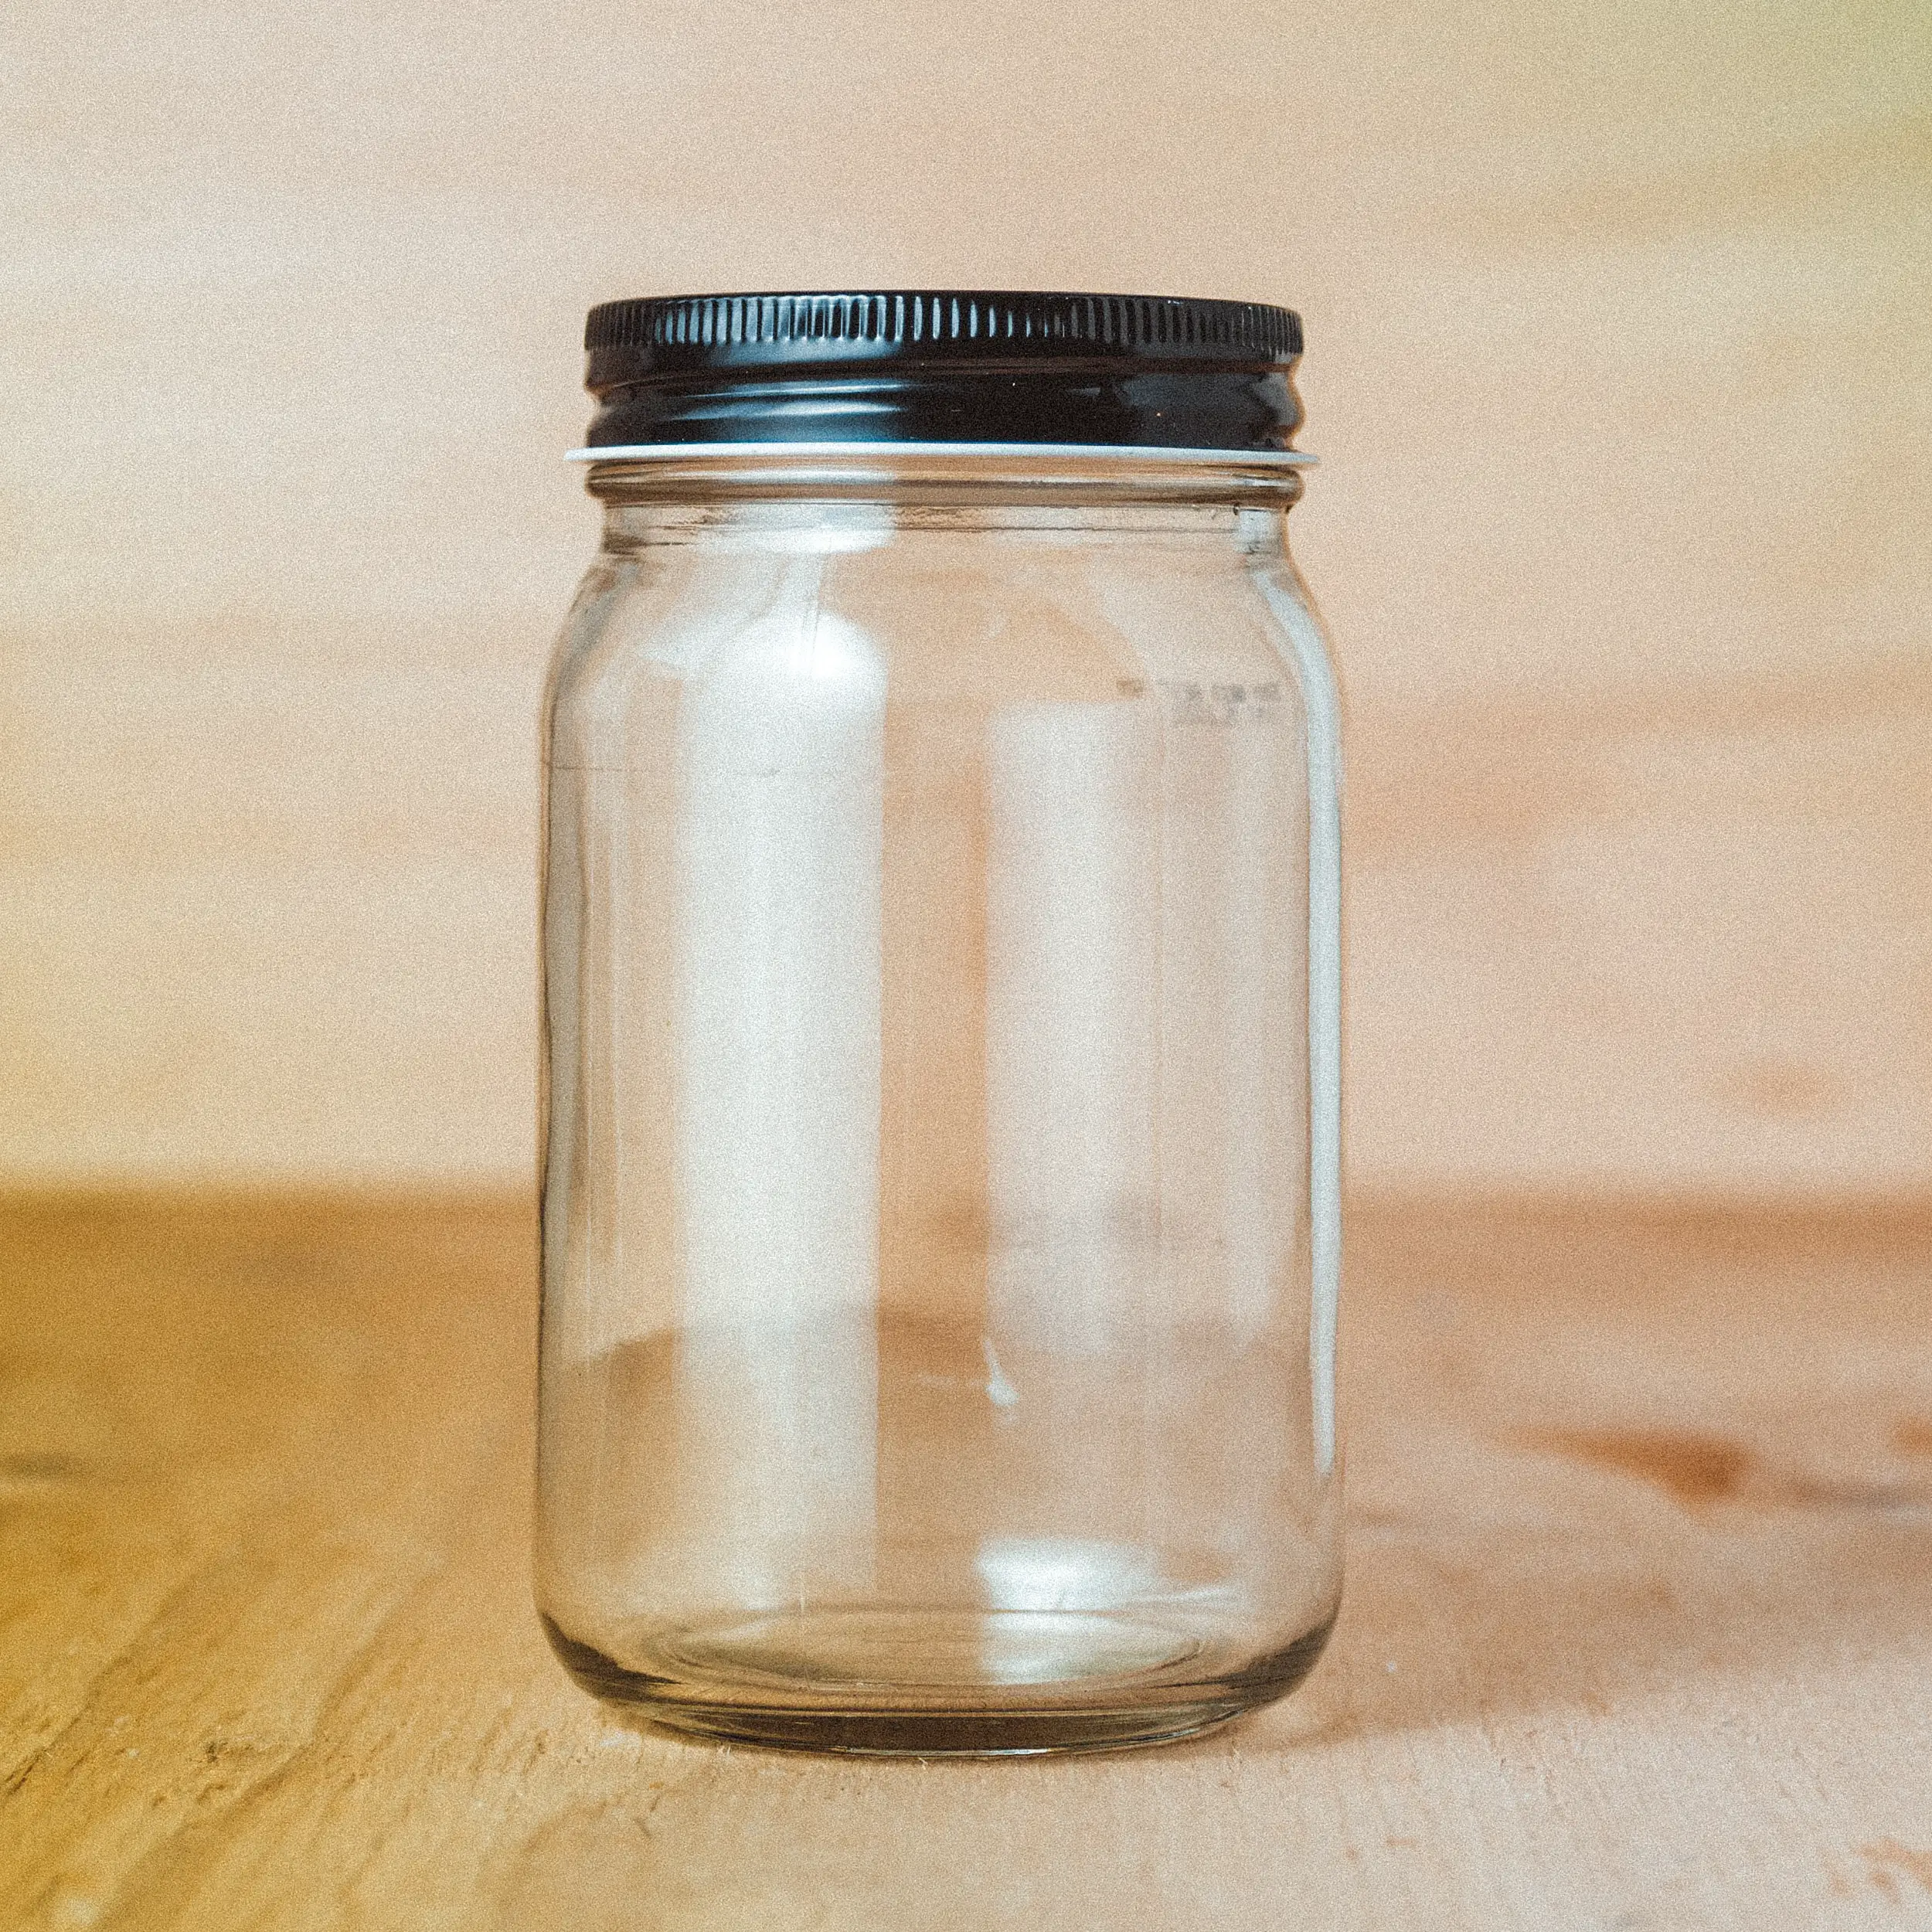 Can Jam Jar Lids Be Recycled?